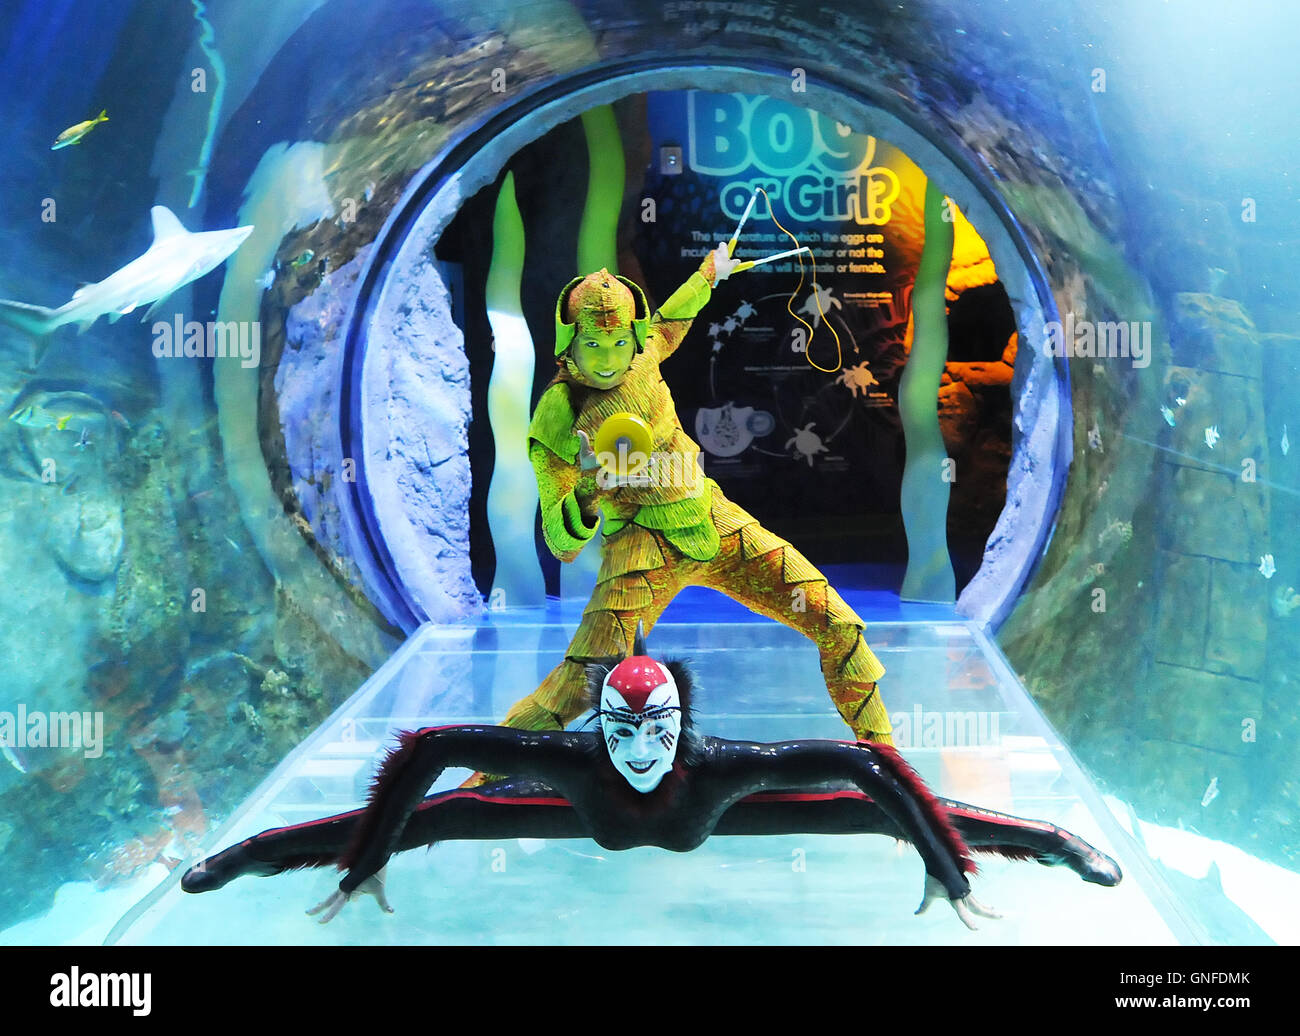 Orlando, Florida, USA. 30th August, 2016. Cirque du Soleil performers Wei-Liang Lin of Taiwan (top) and Alanna Baker from the U.K. pose inside a tunnel at the SEA LIFE Orlando Aquarium in Orlando, Florida on August 30, 2016. The media event was held to promote the Florida premiere of the Cirque du Soleil show 'OVO', with performances scheduled in Orlando, Estero, and Jacksonville beginning September 21, 2016. The 'OVO' cast is comprised of 50 acrobatic performing artists from 12 countries. Credit:  Paul Hennessy/Alamy Live News Stock Photo